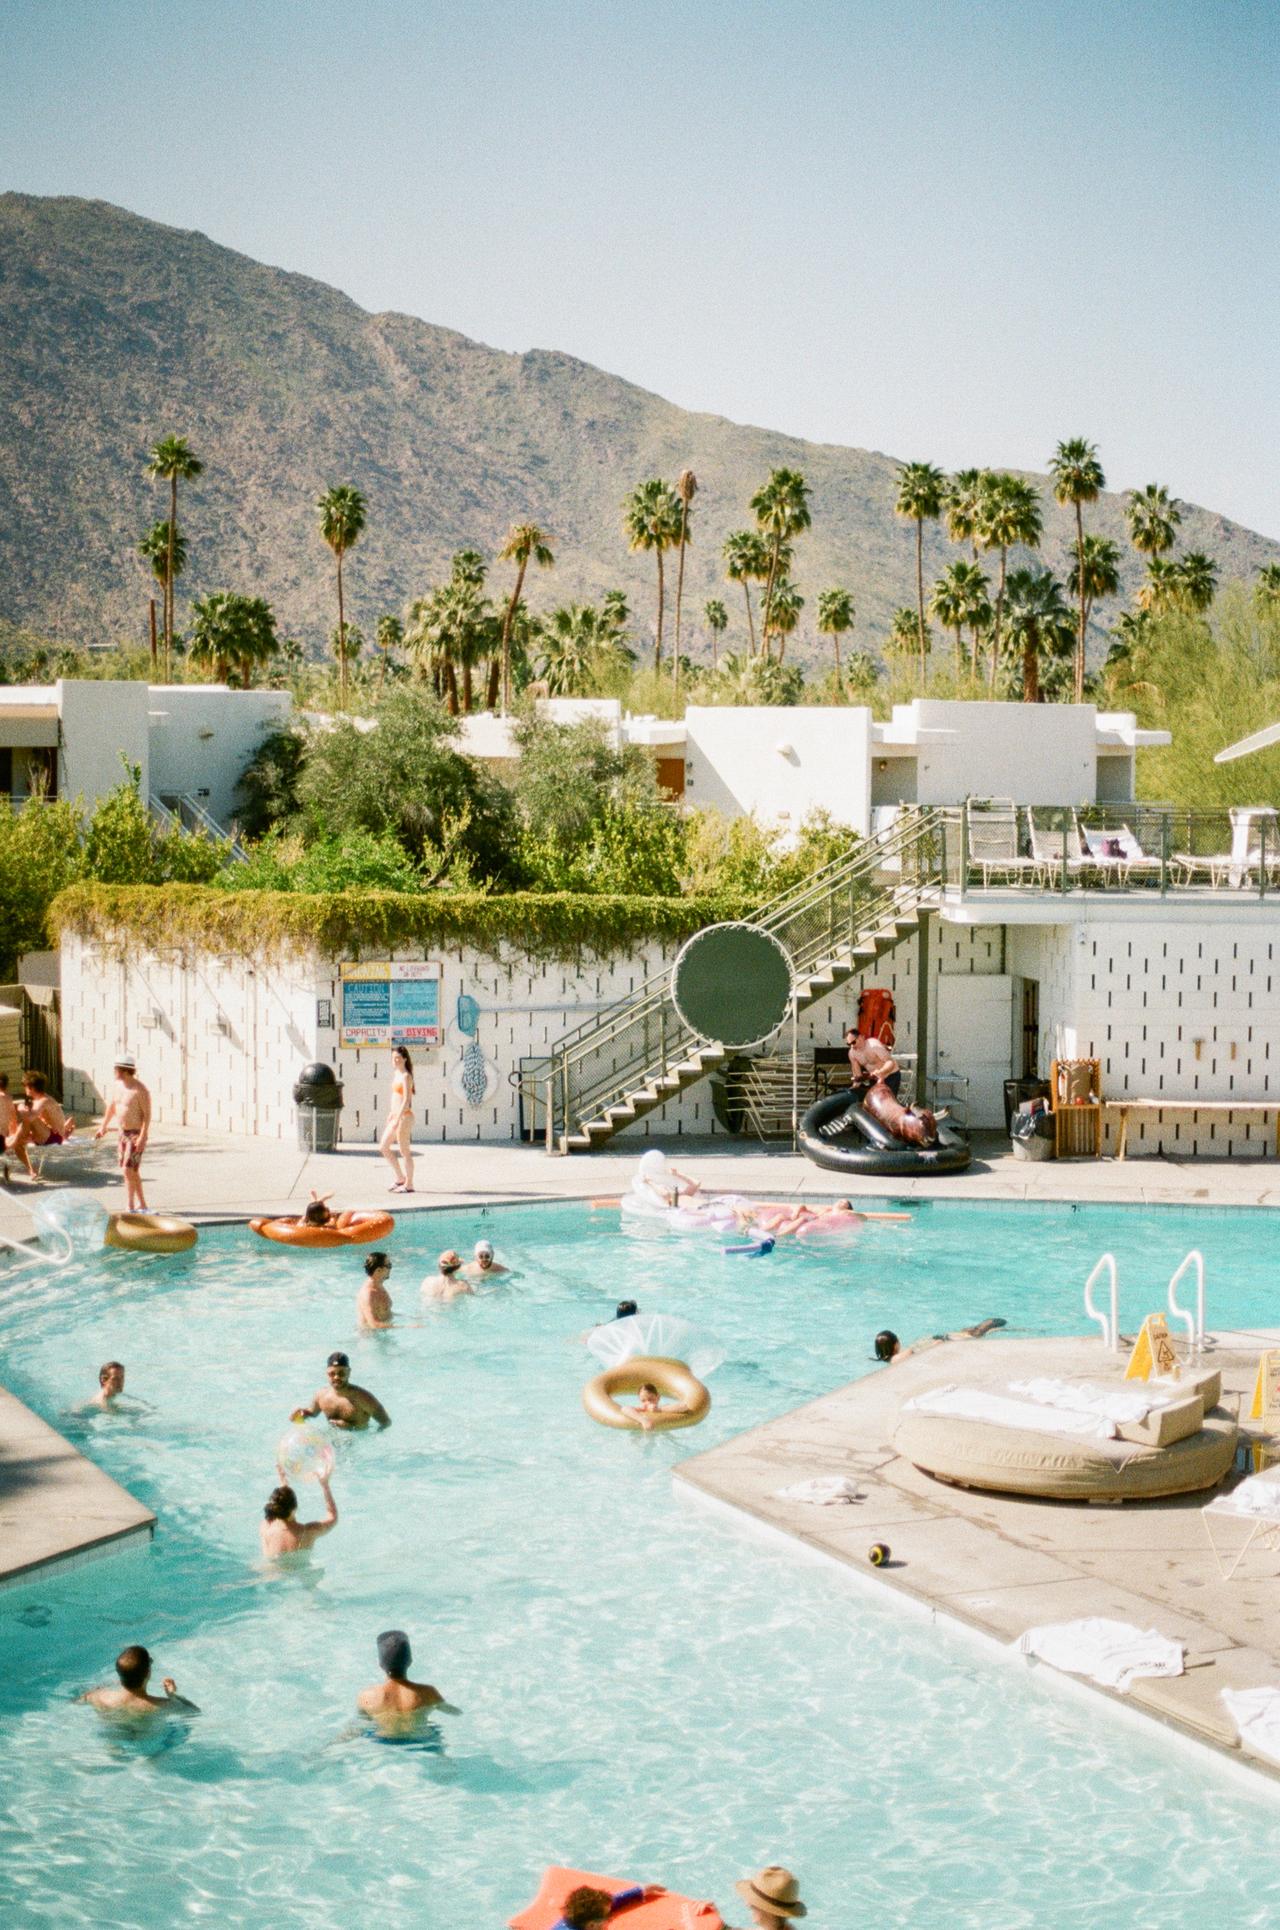 Film Photo of Pool and Palm Trees by Megan Hand